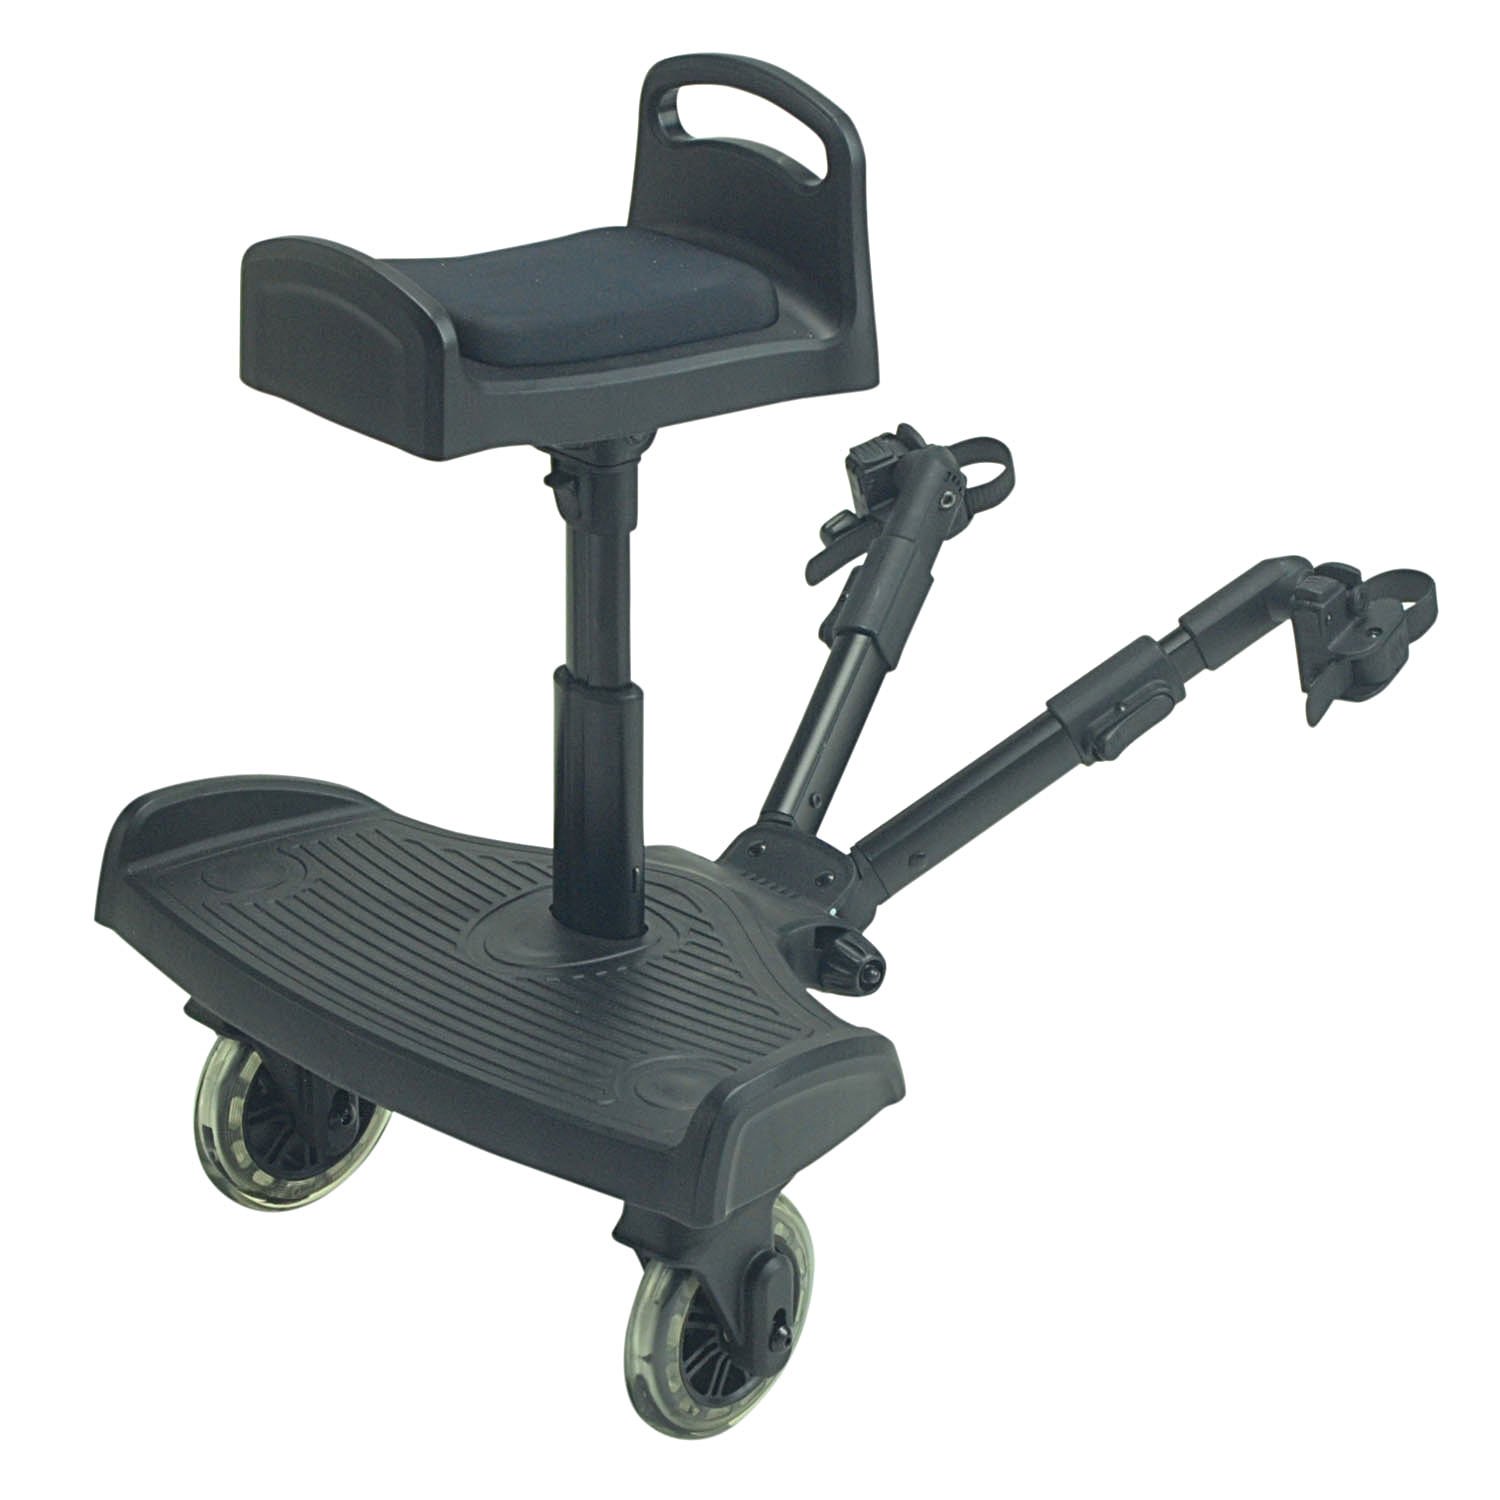 For-Your-Little-Ride On Board Compatible Travel Systems, Teutonia Cosmo 10